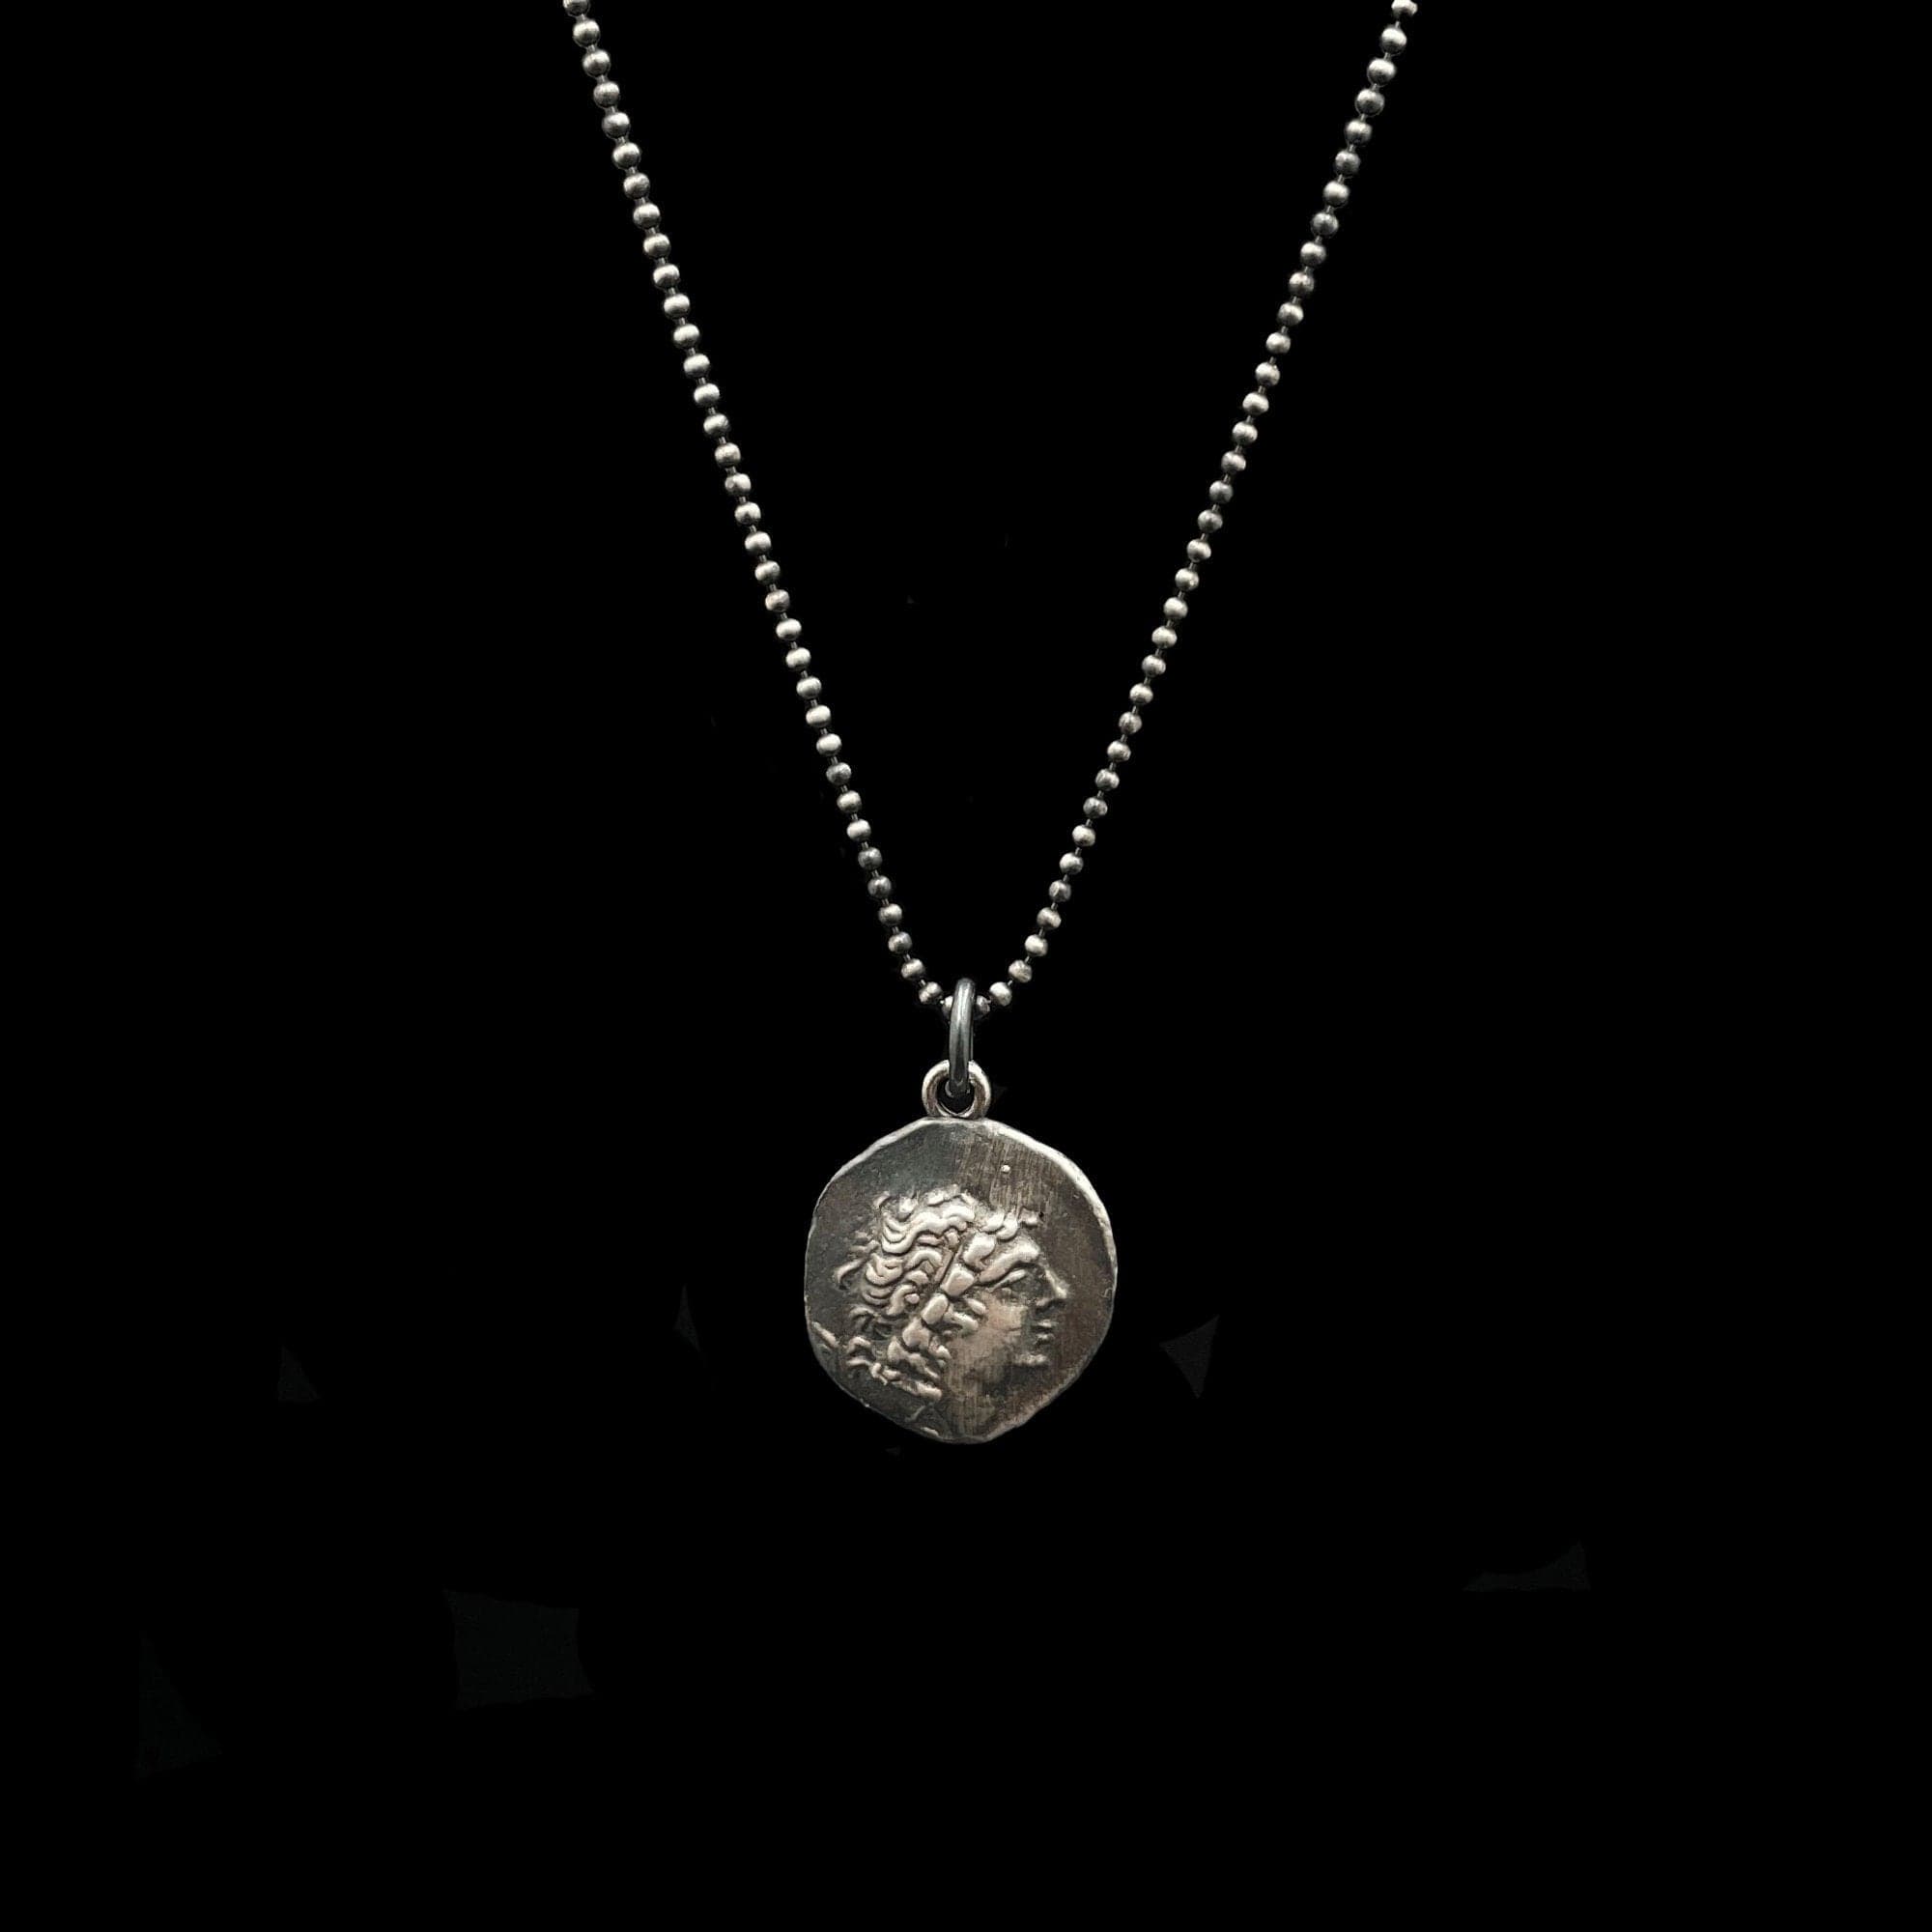 Ancient Greek Coin Necklace - Museum Quality Replica Ancient Treasures Ancientreasures Viking Odin Thor Mjolnir Celtic Ancient Egypt Norse Norse Mythology